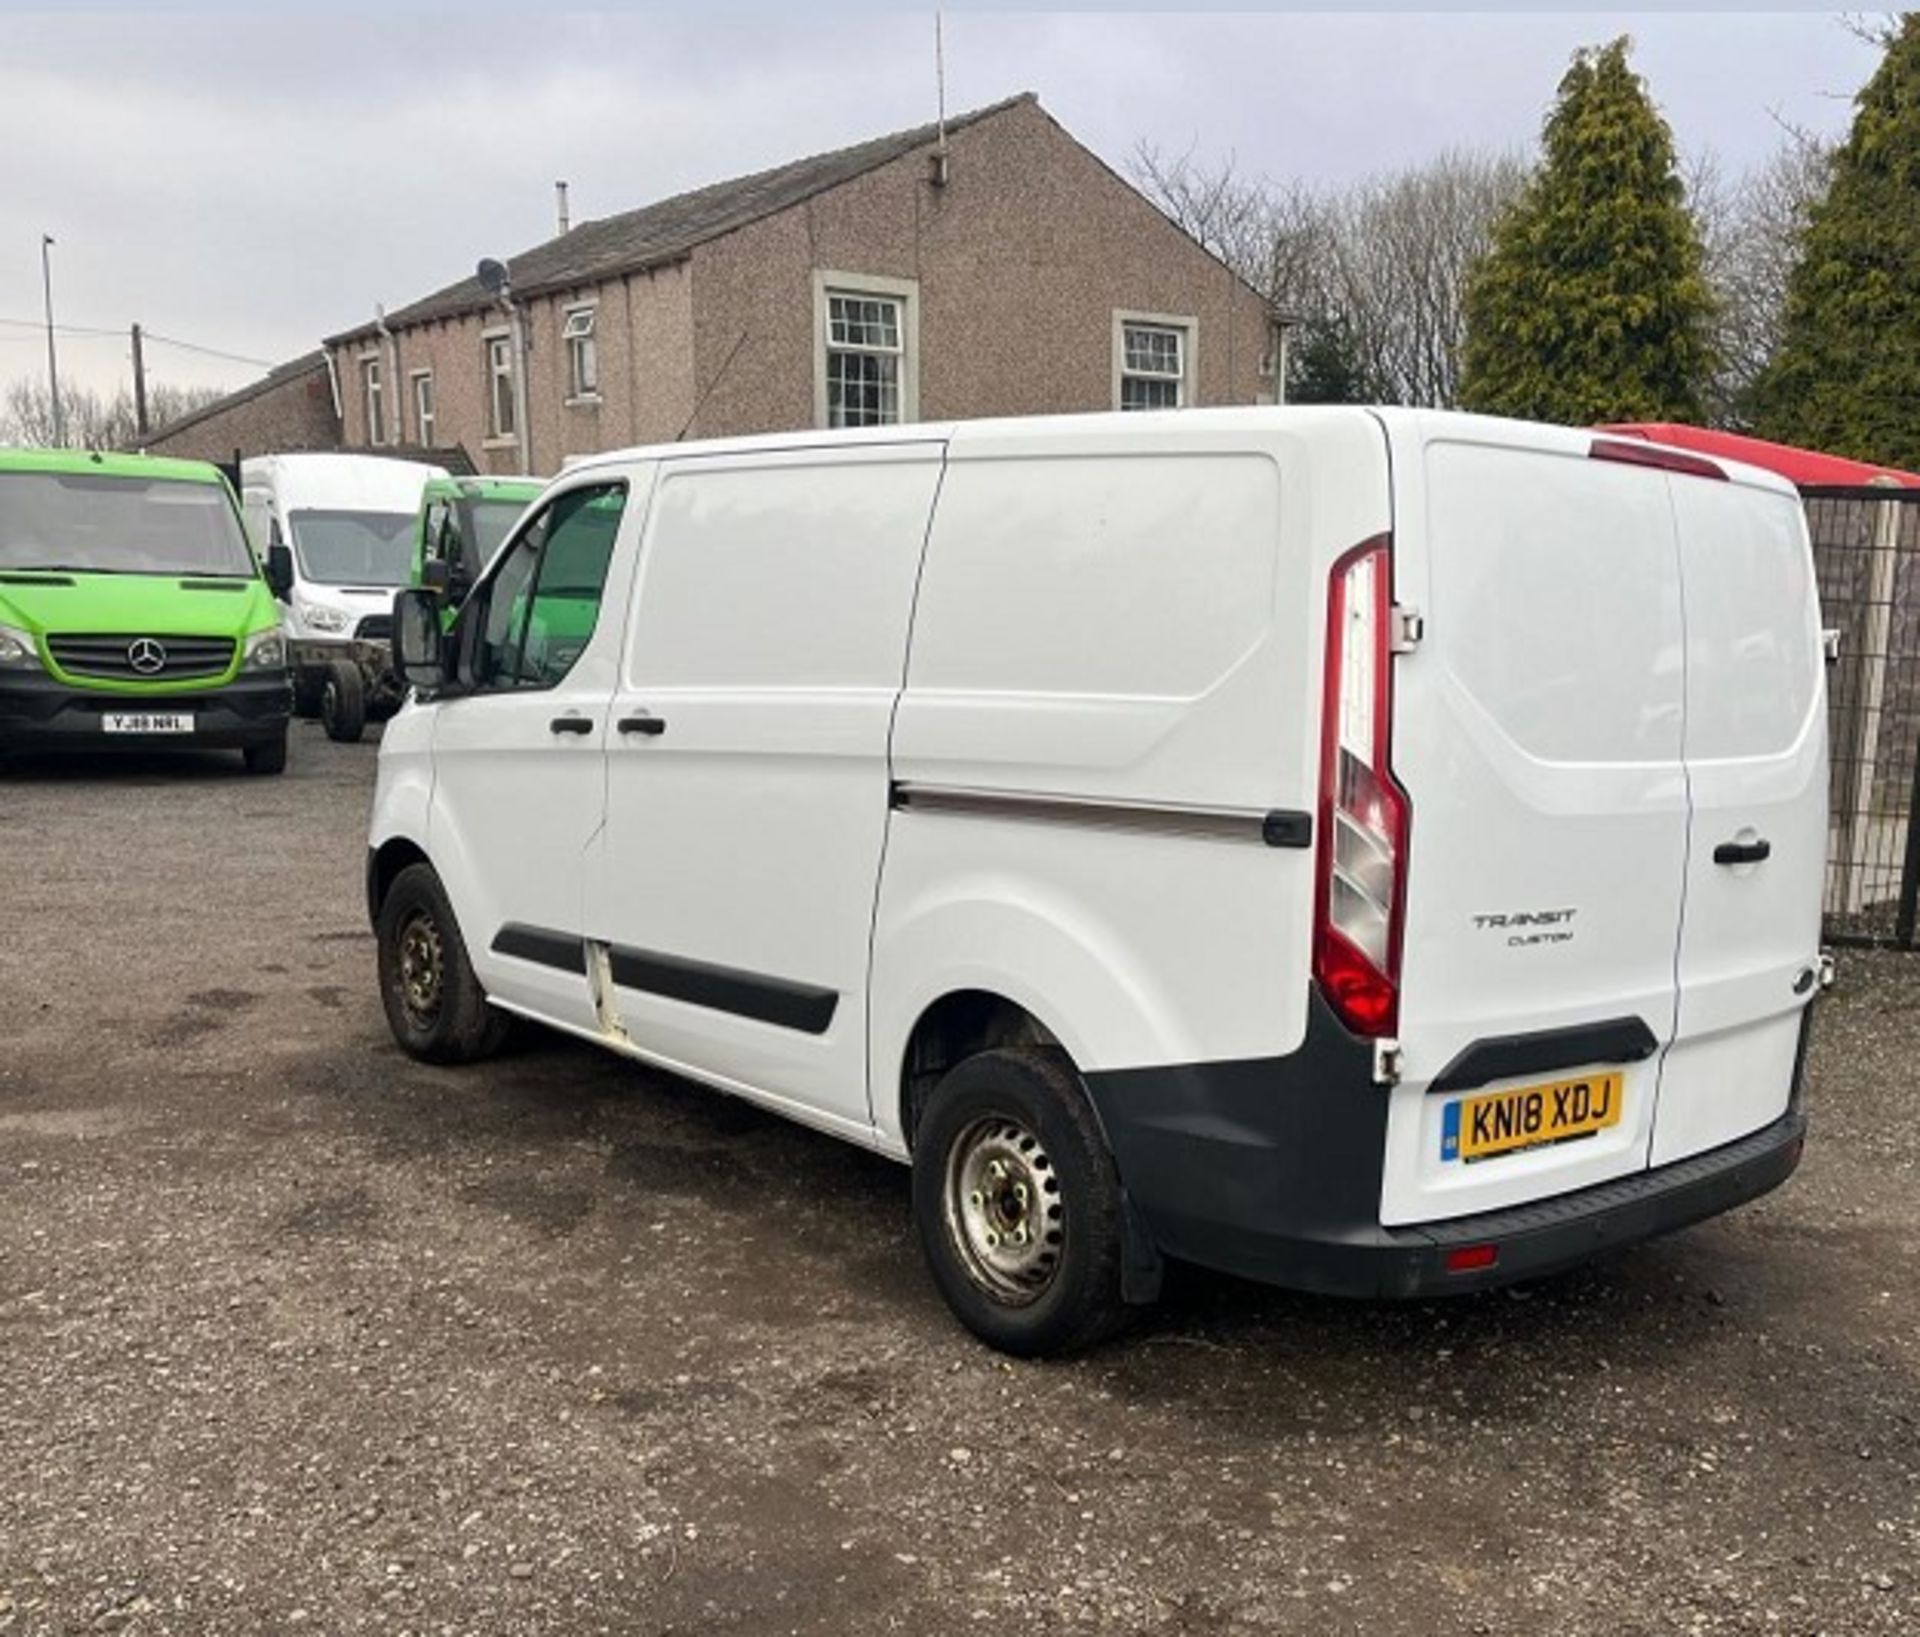 2018 FORD TRANSIT CUSTOM TDCI 130 L1 H1 SWB PANEL VAN ->>>SPECIAL CLEARANCE<<< - Image 3 of 15